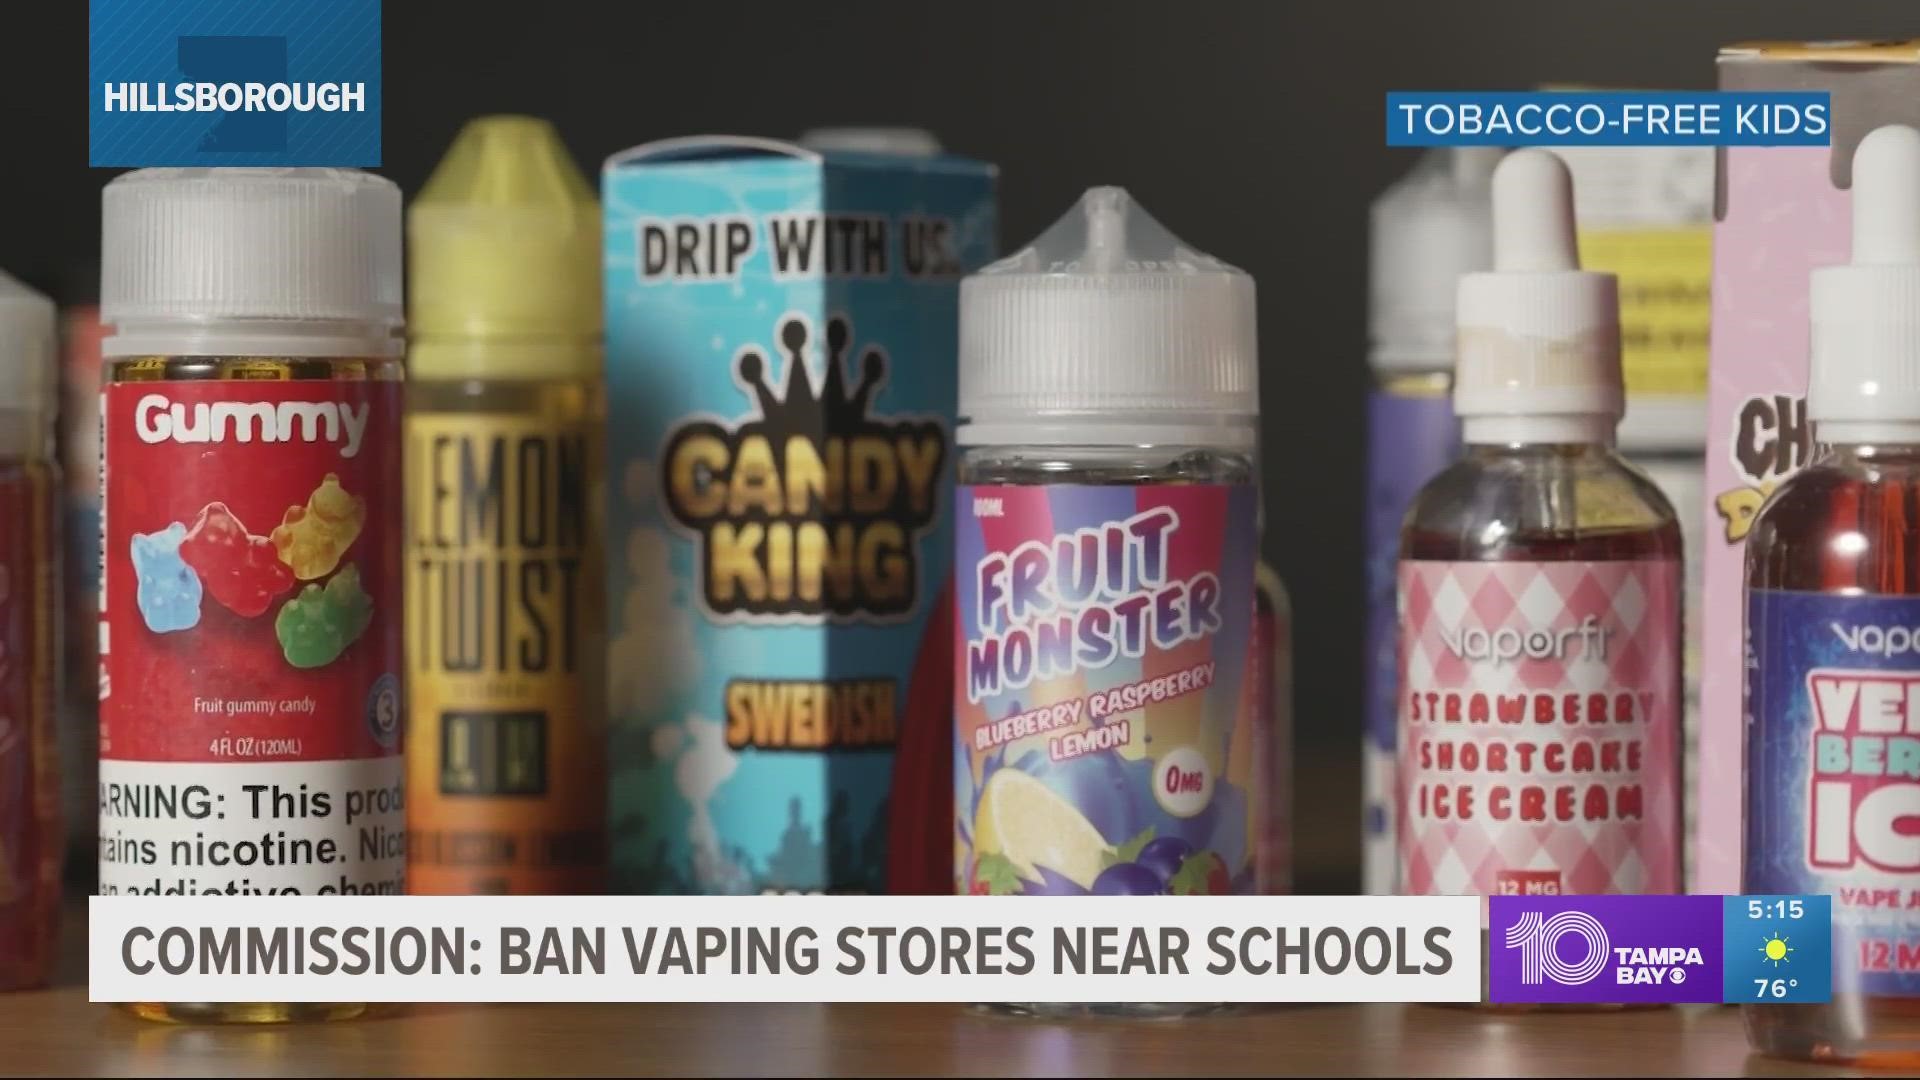 As more and more children find themselves addicted to vaping, county commissioners are looking for ways to keep vaping products further away.